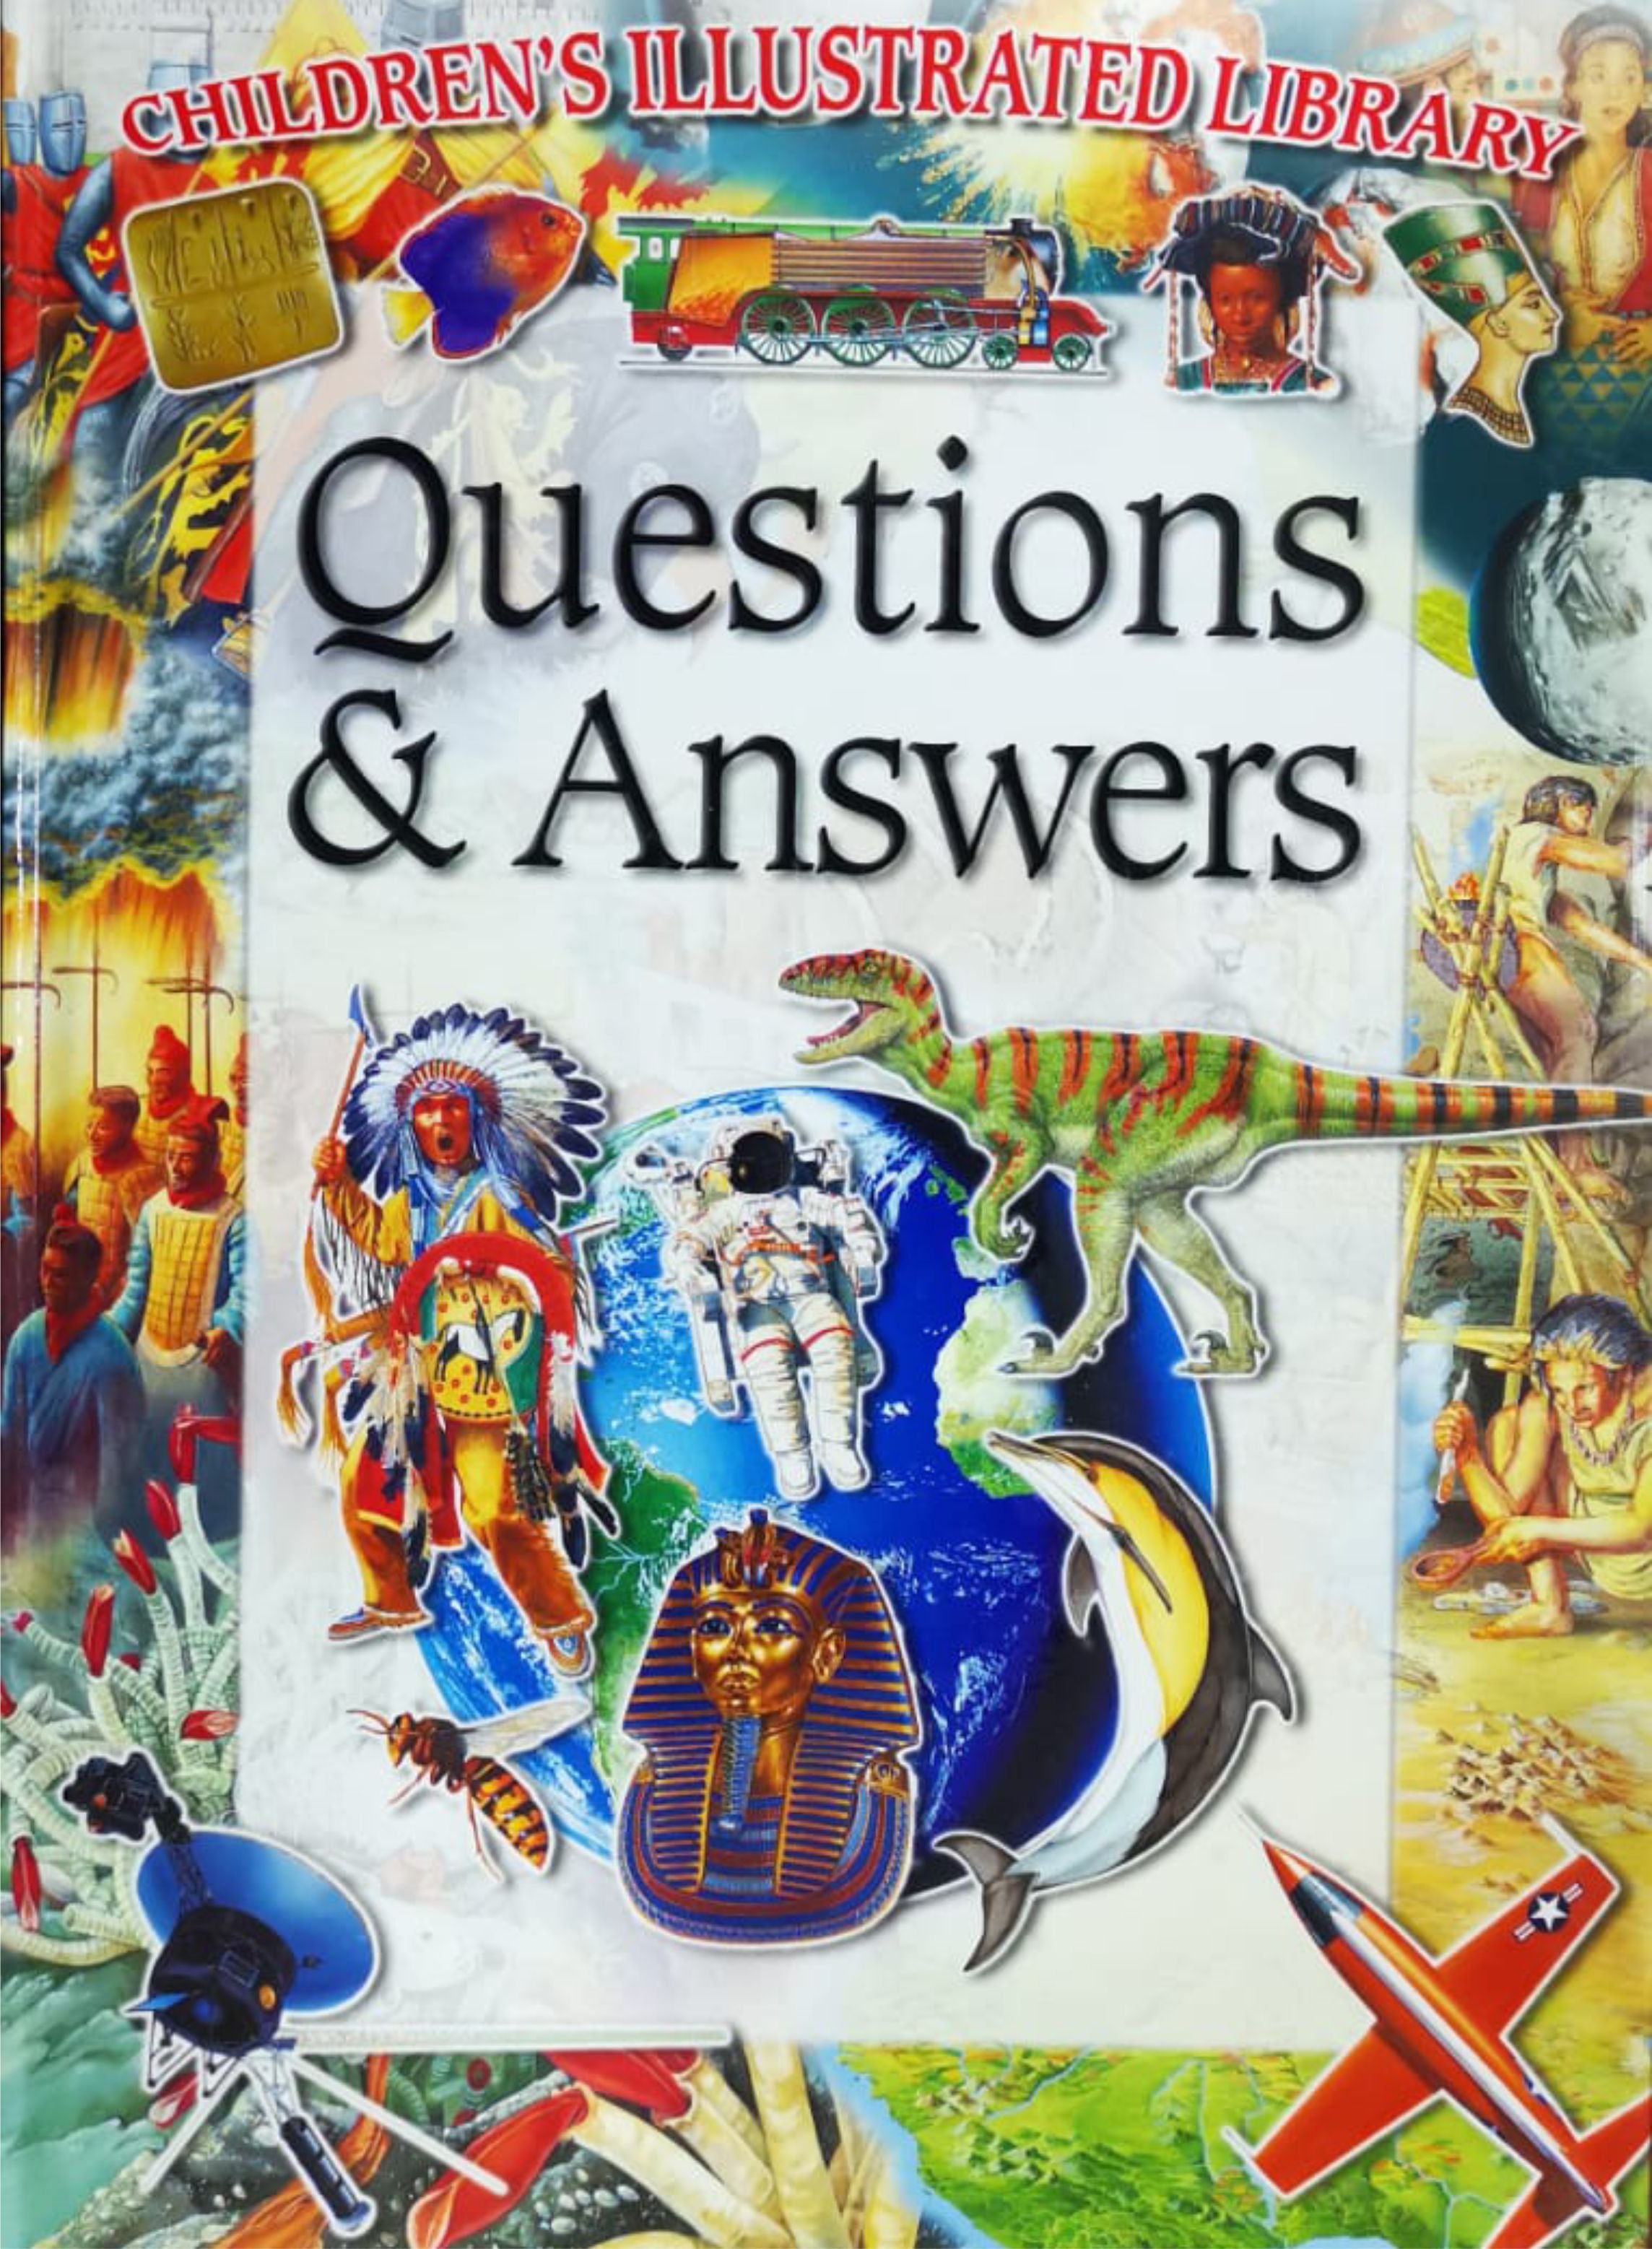 Questions & Answers (Children's Illustrated Library)